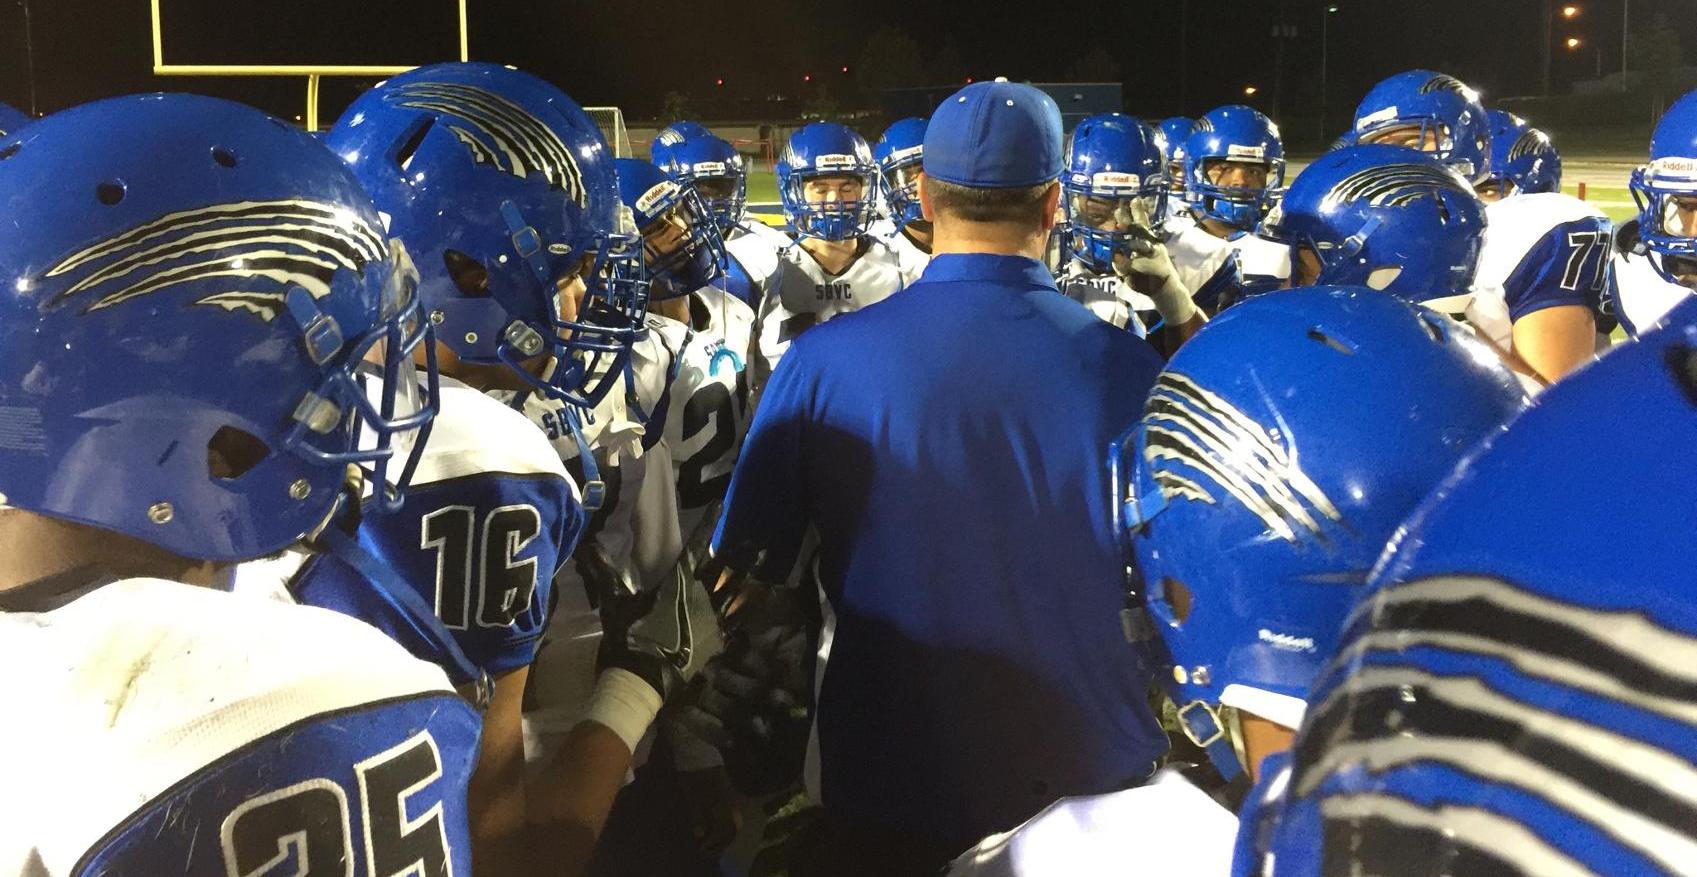 SBVC Football unloads a season’s worth of frustration onto the Cougars, 48-3